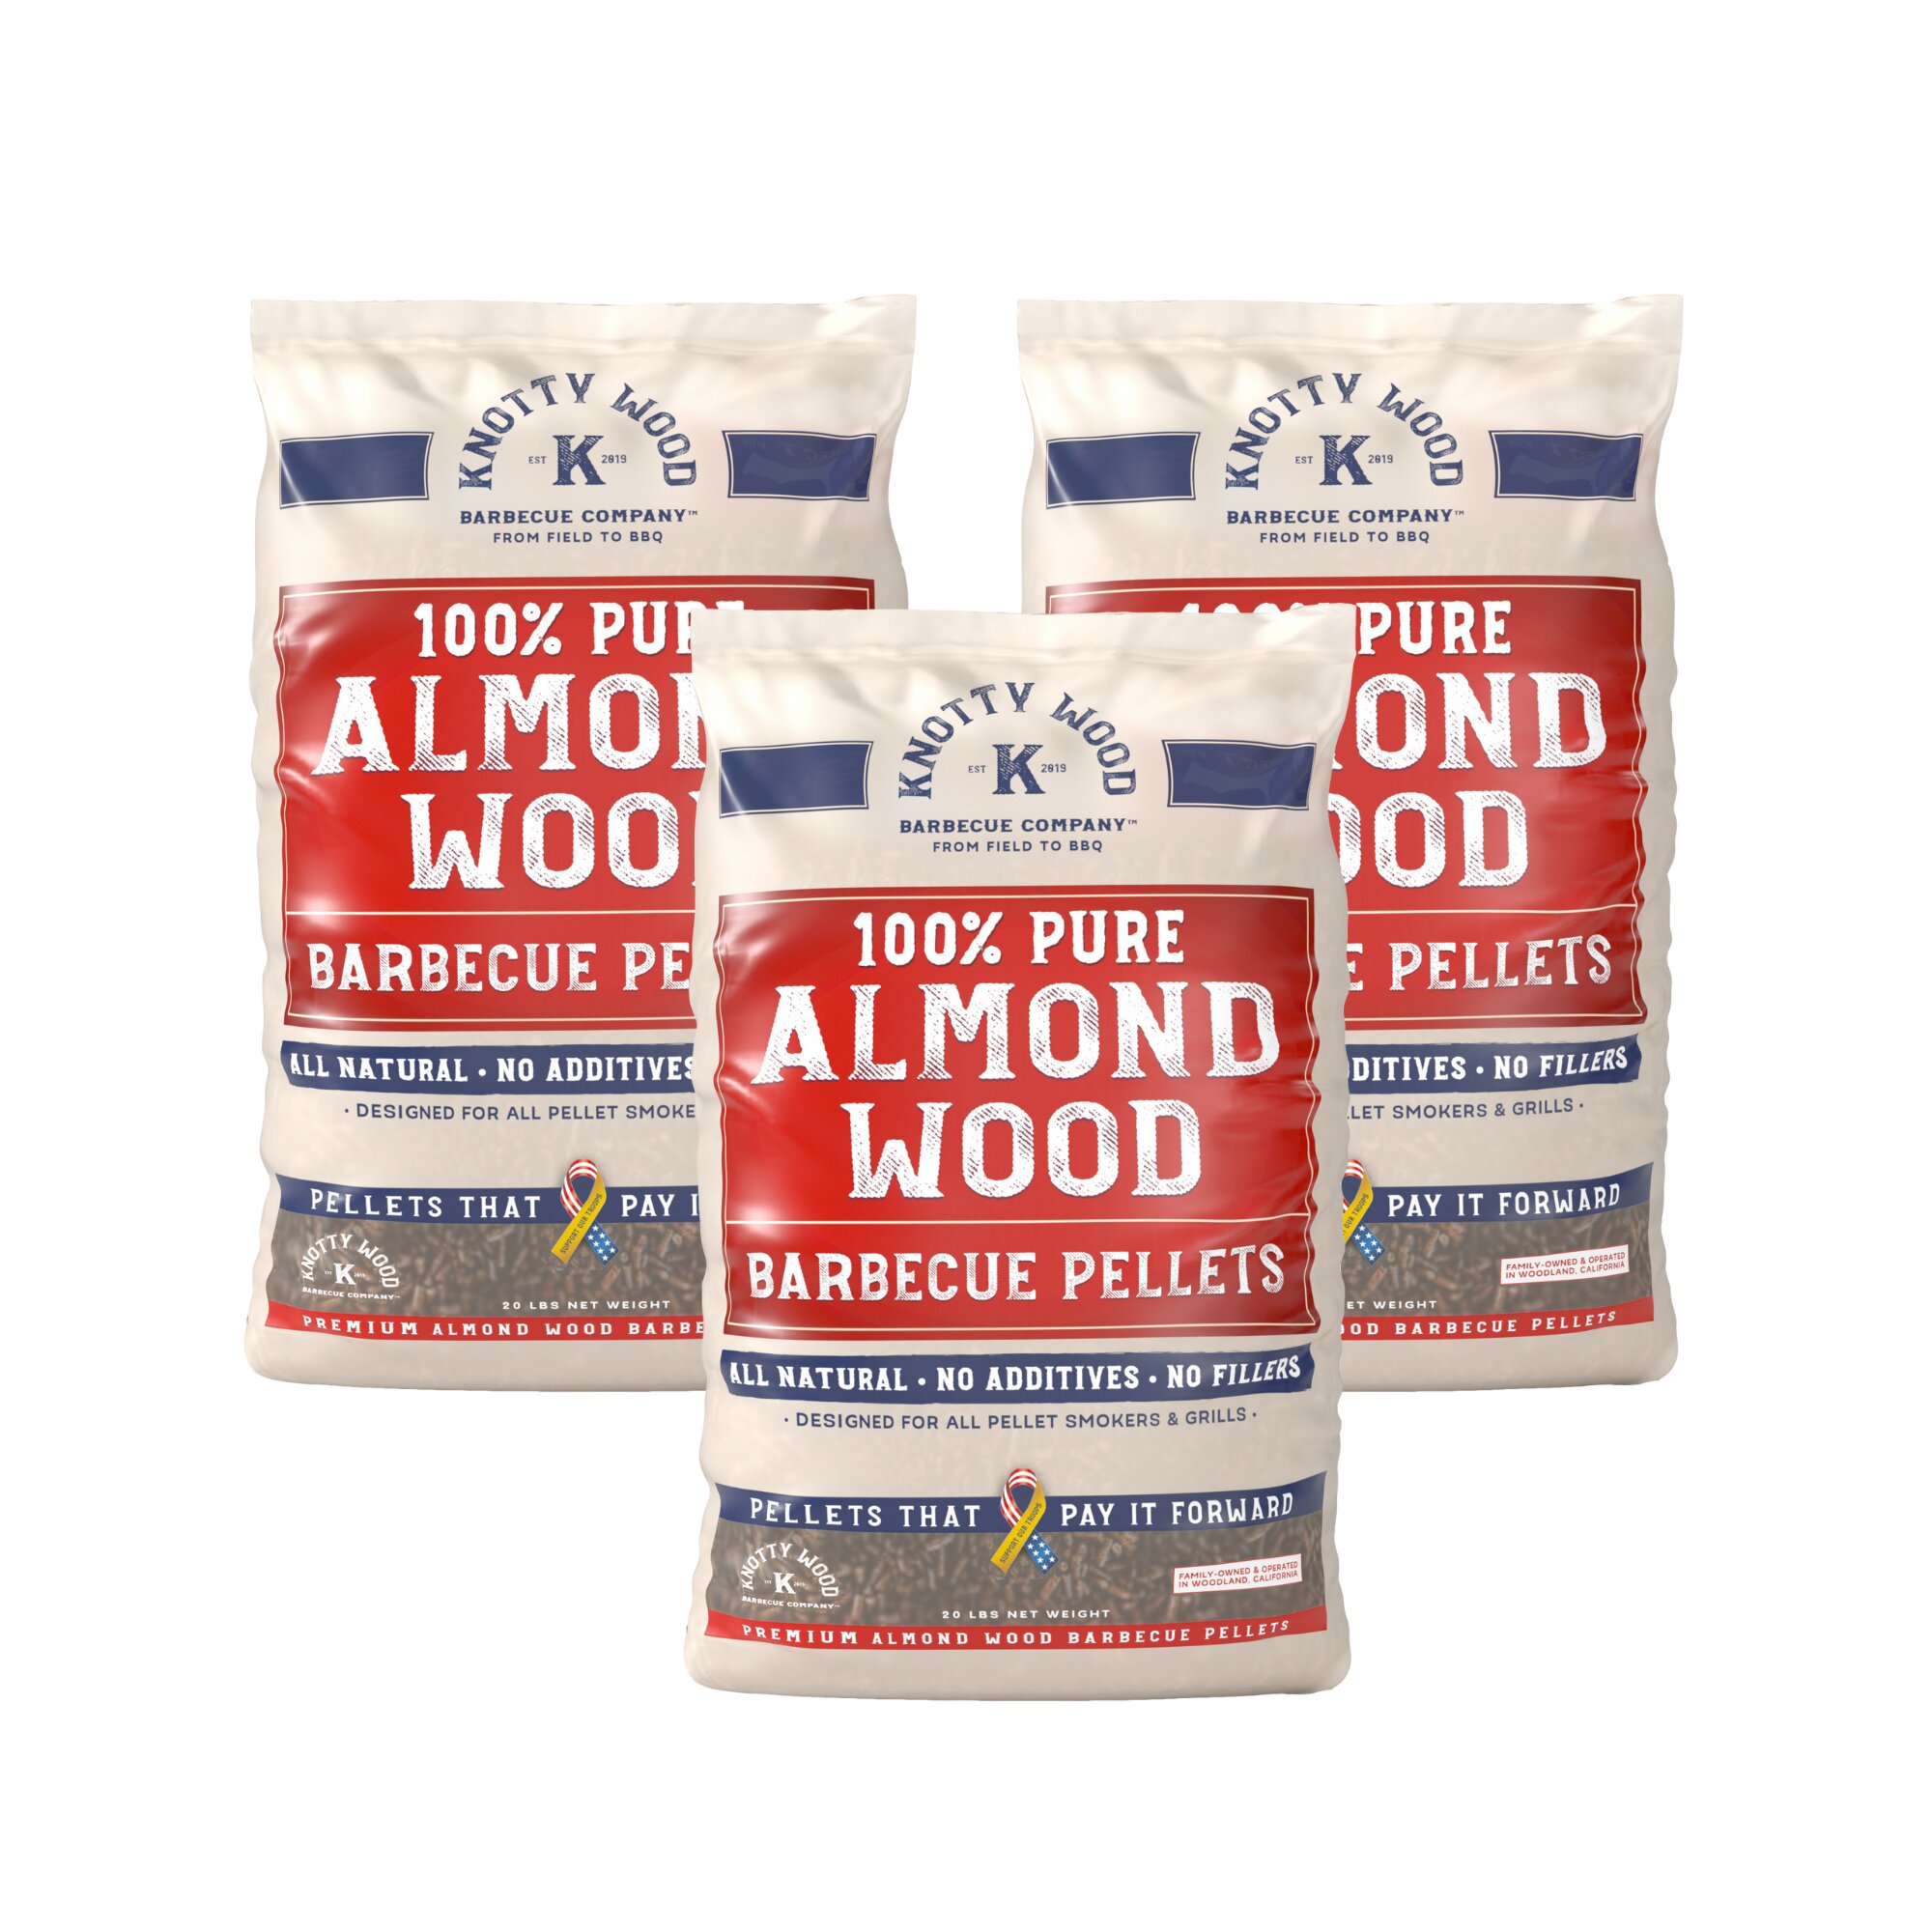 100% Pure Almond Wood Barbecue Grilling Pellets 40 lbs 